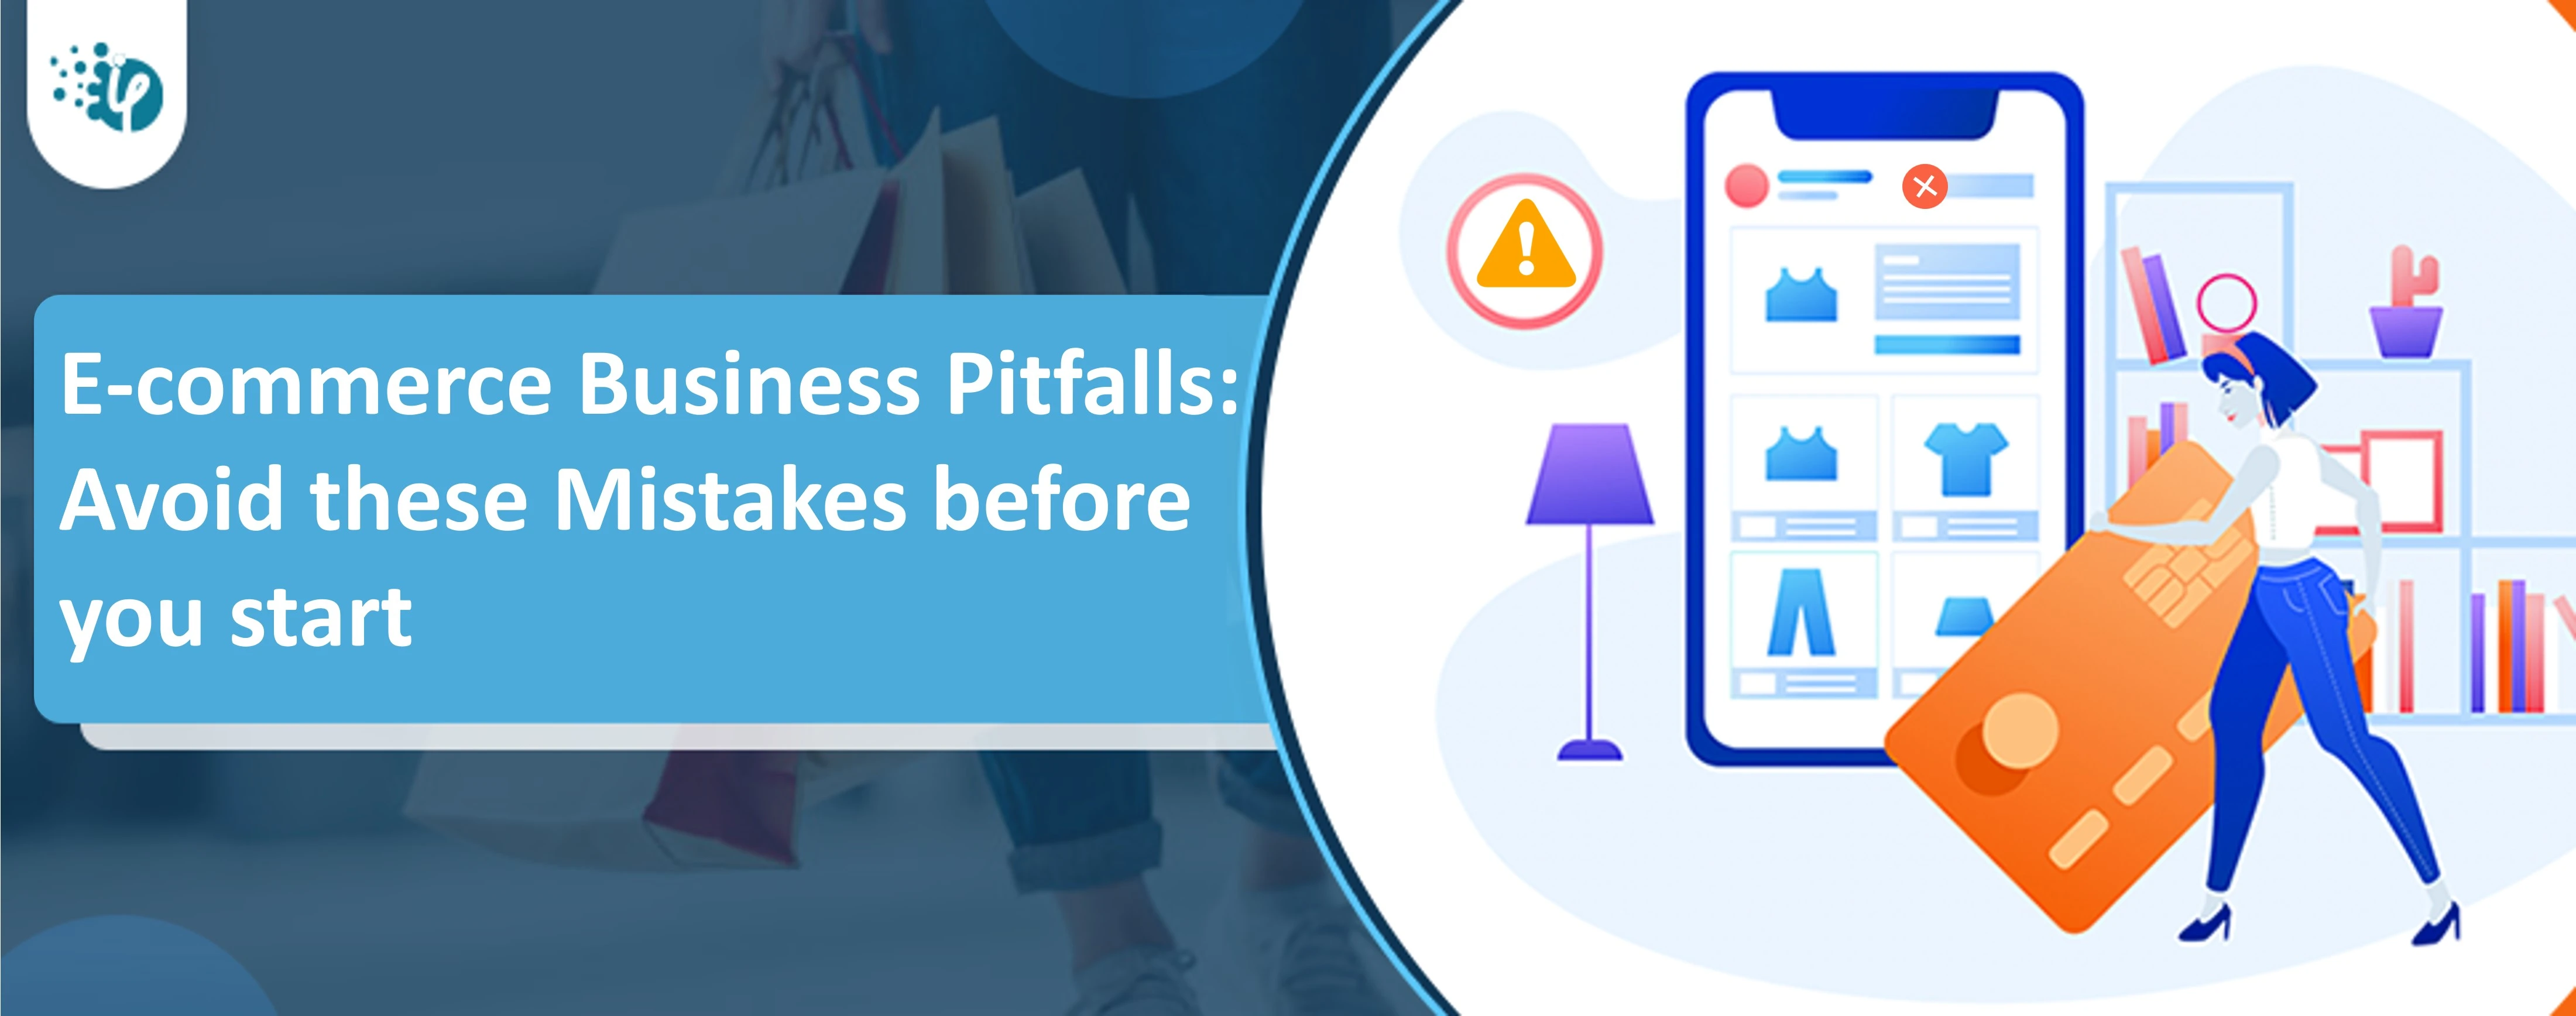 E-commerce Business Pitfalls: Avoid these mistakes before you start 